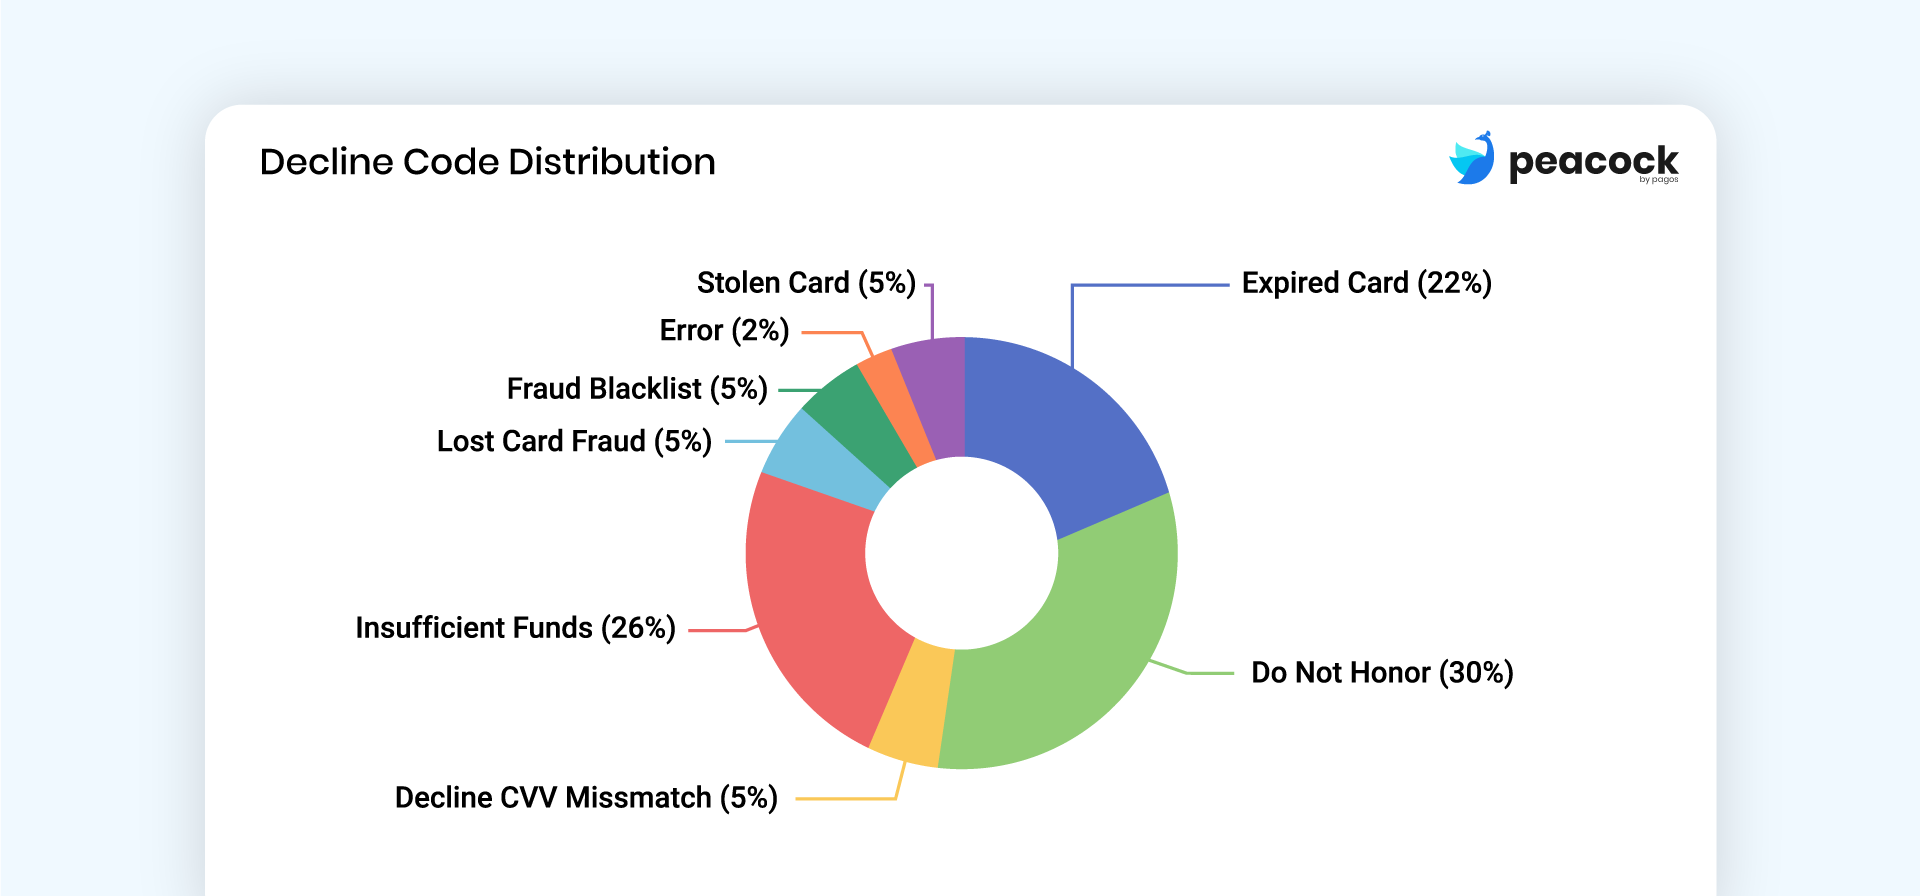 Chart illustrating distribution of decline code reasons such as stolen card, error, expired card, and more